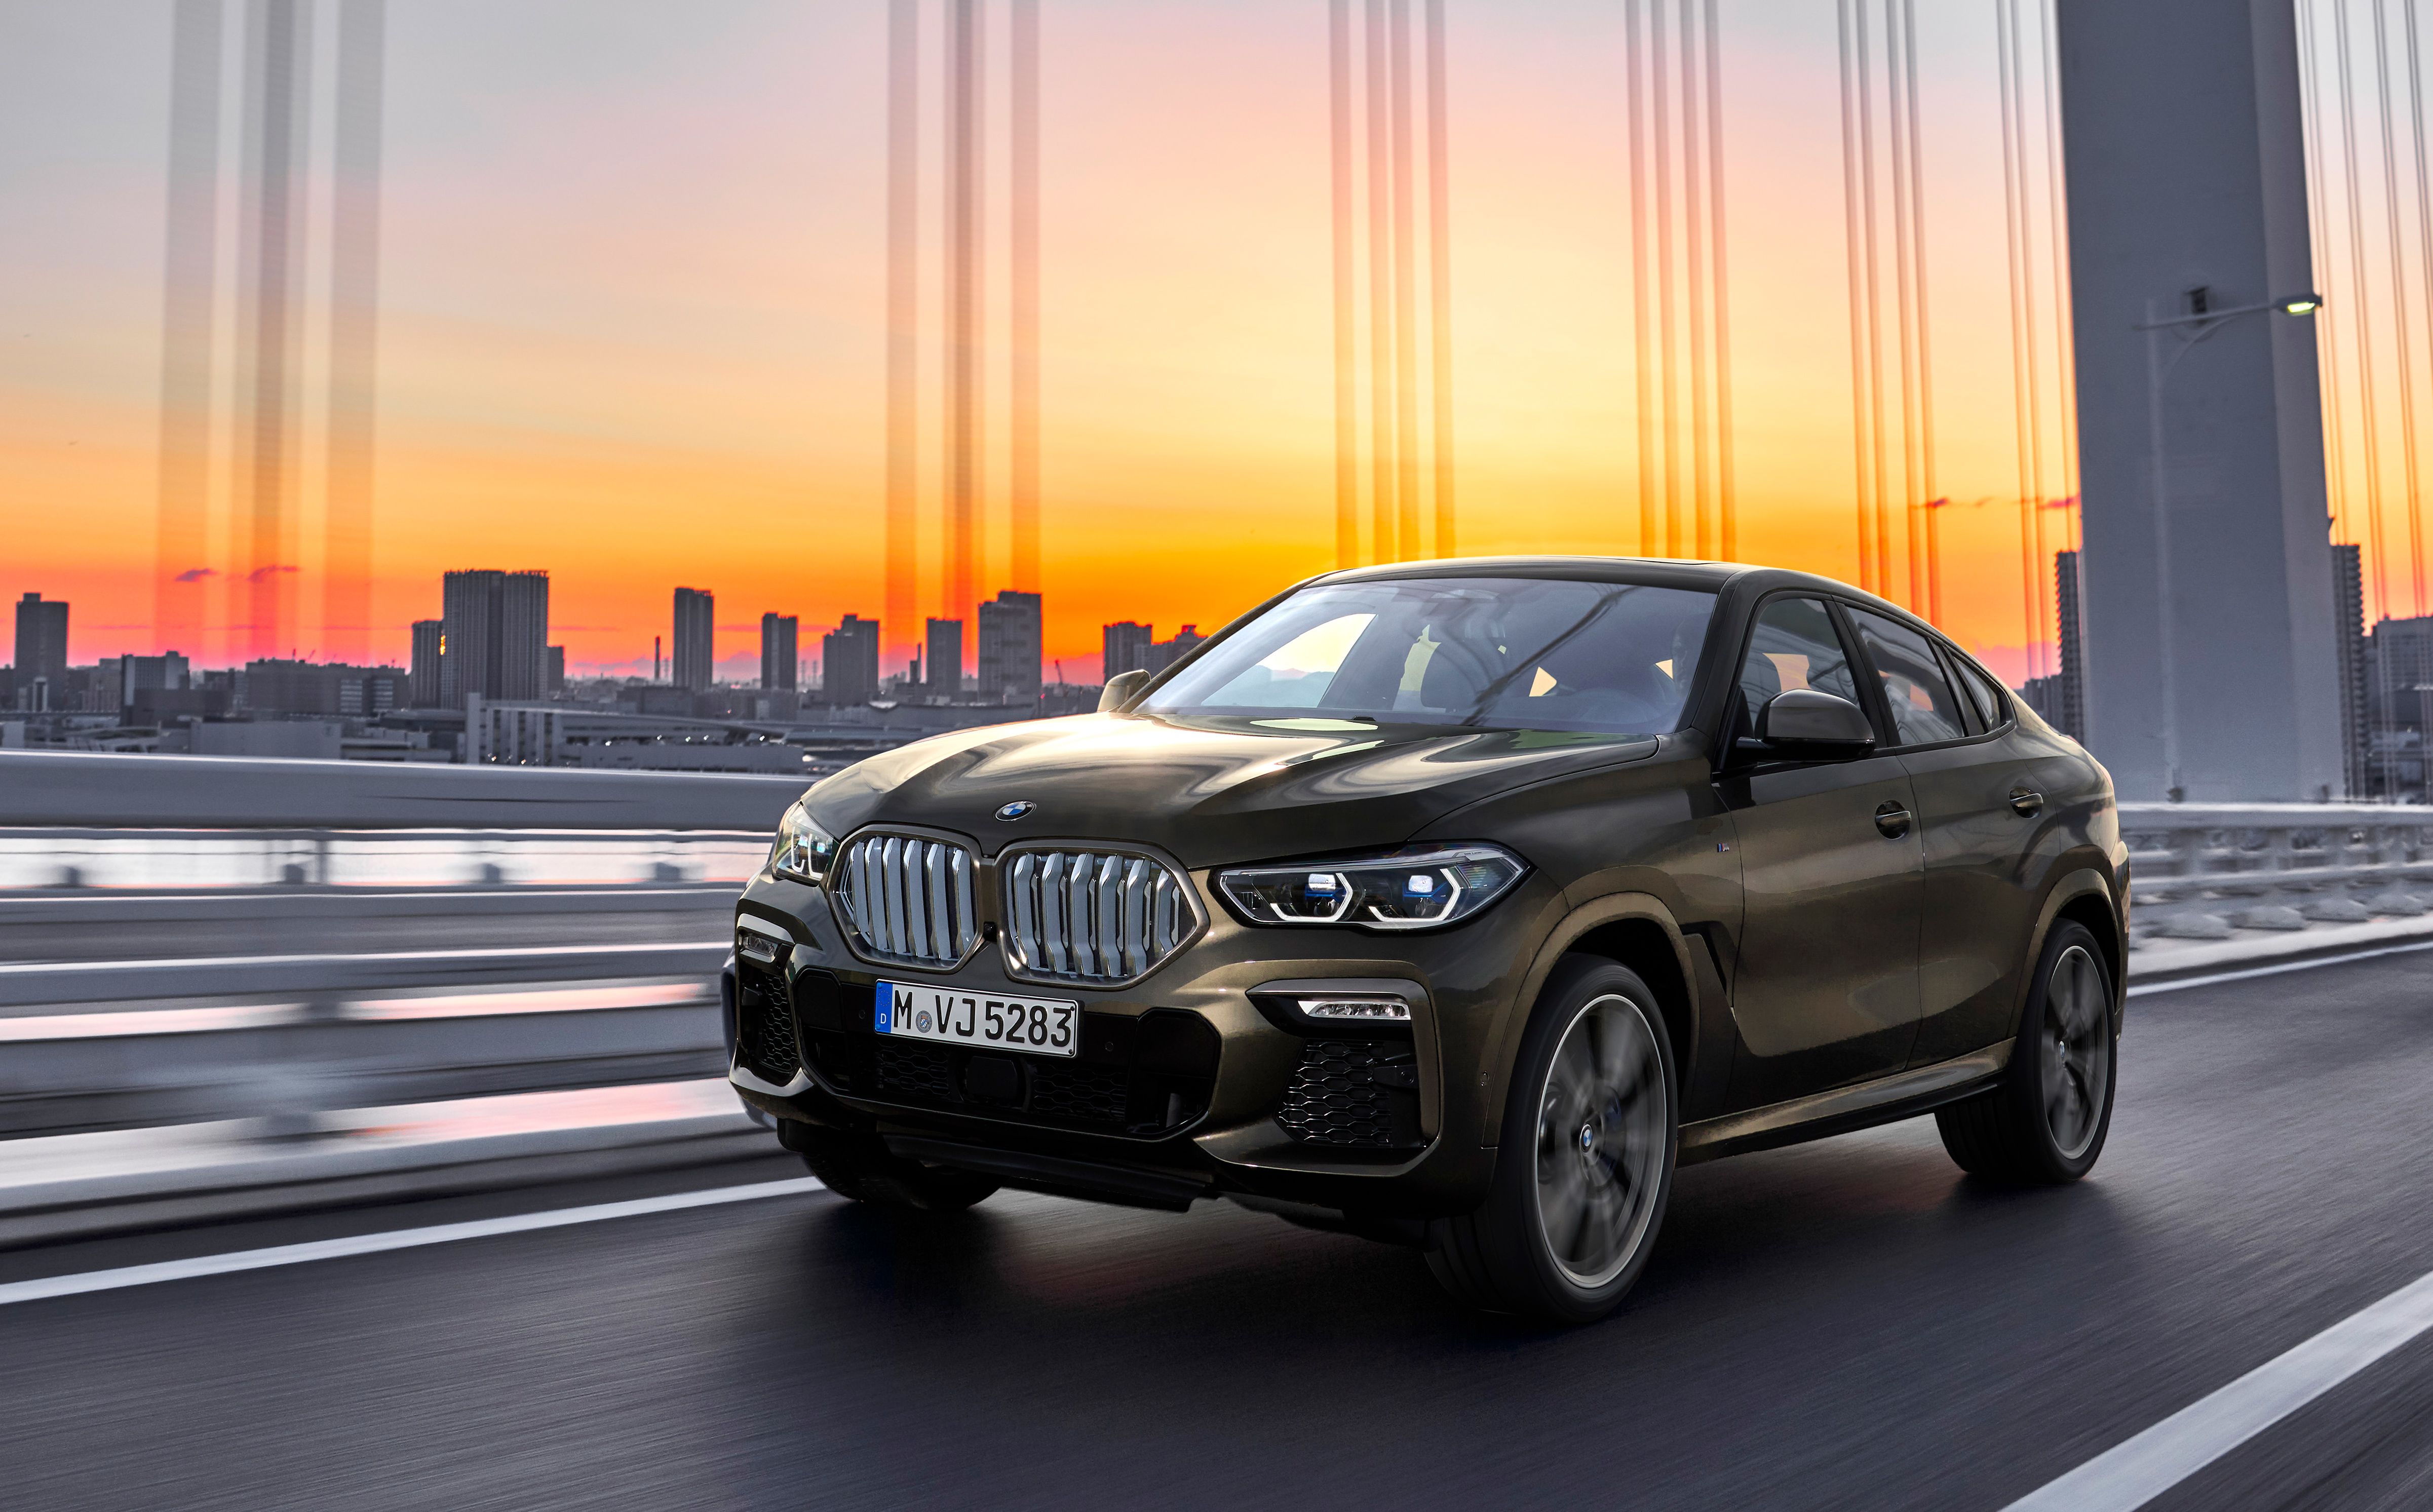 BMW gives its trendsetting 2020 X6 crossover a major makeover in redesign